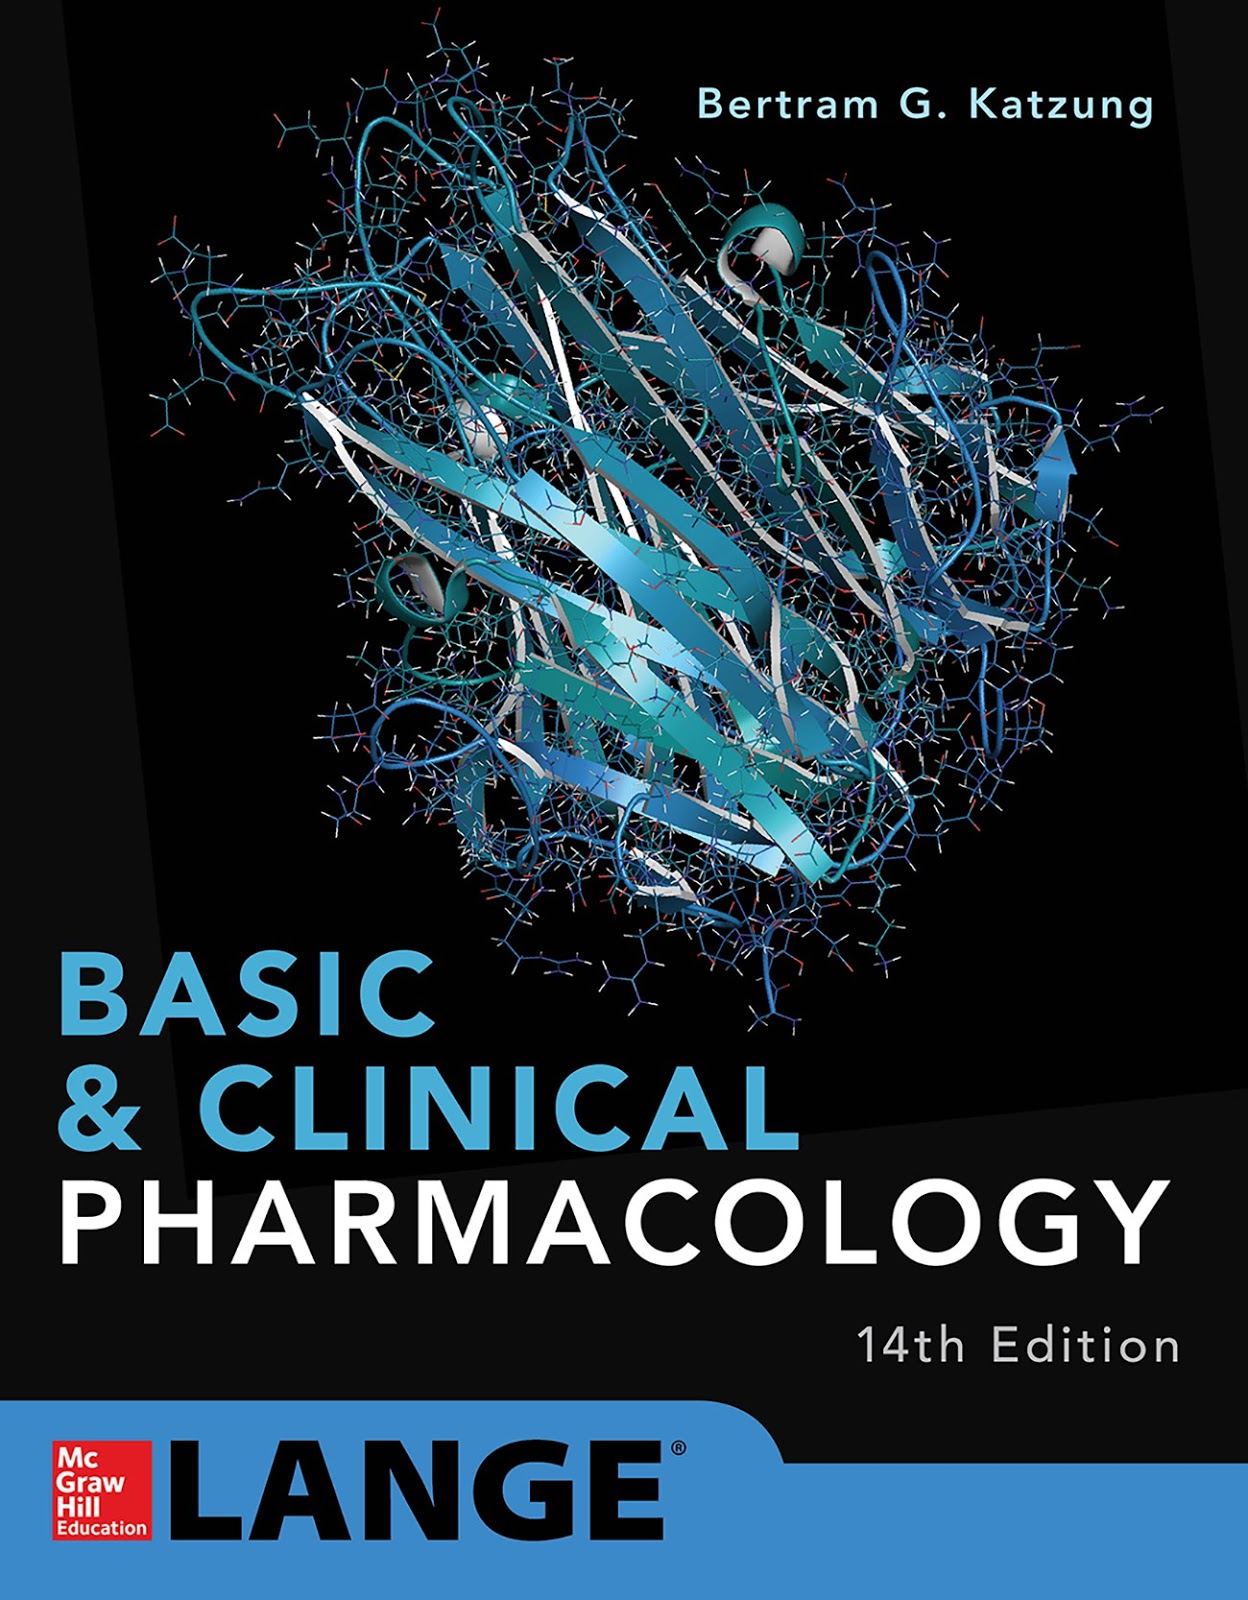 katzung basic and clinical pharmacology 15th edition pdf free download